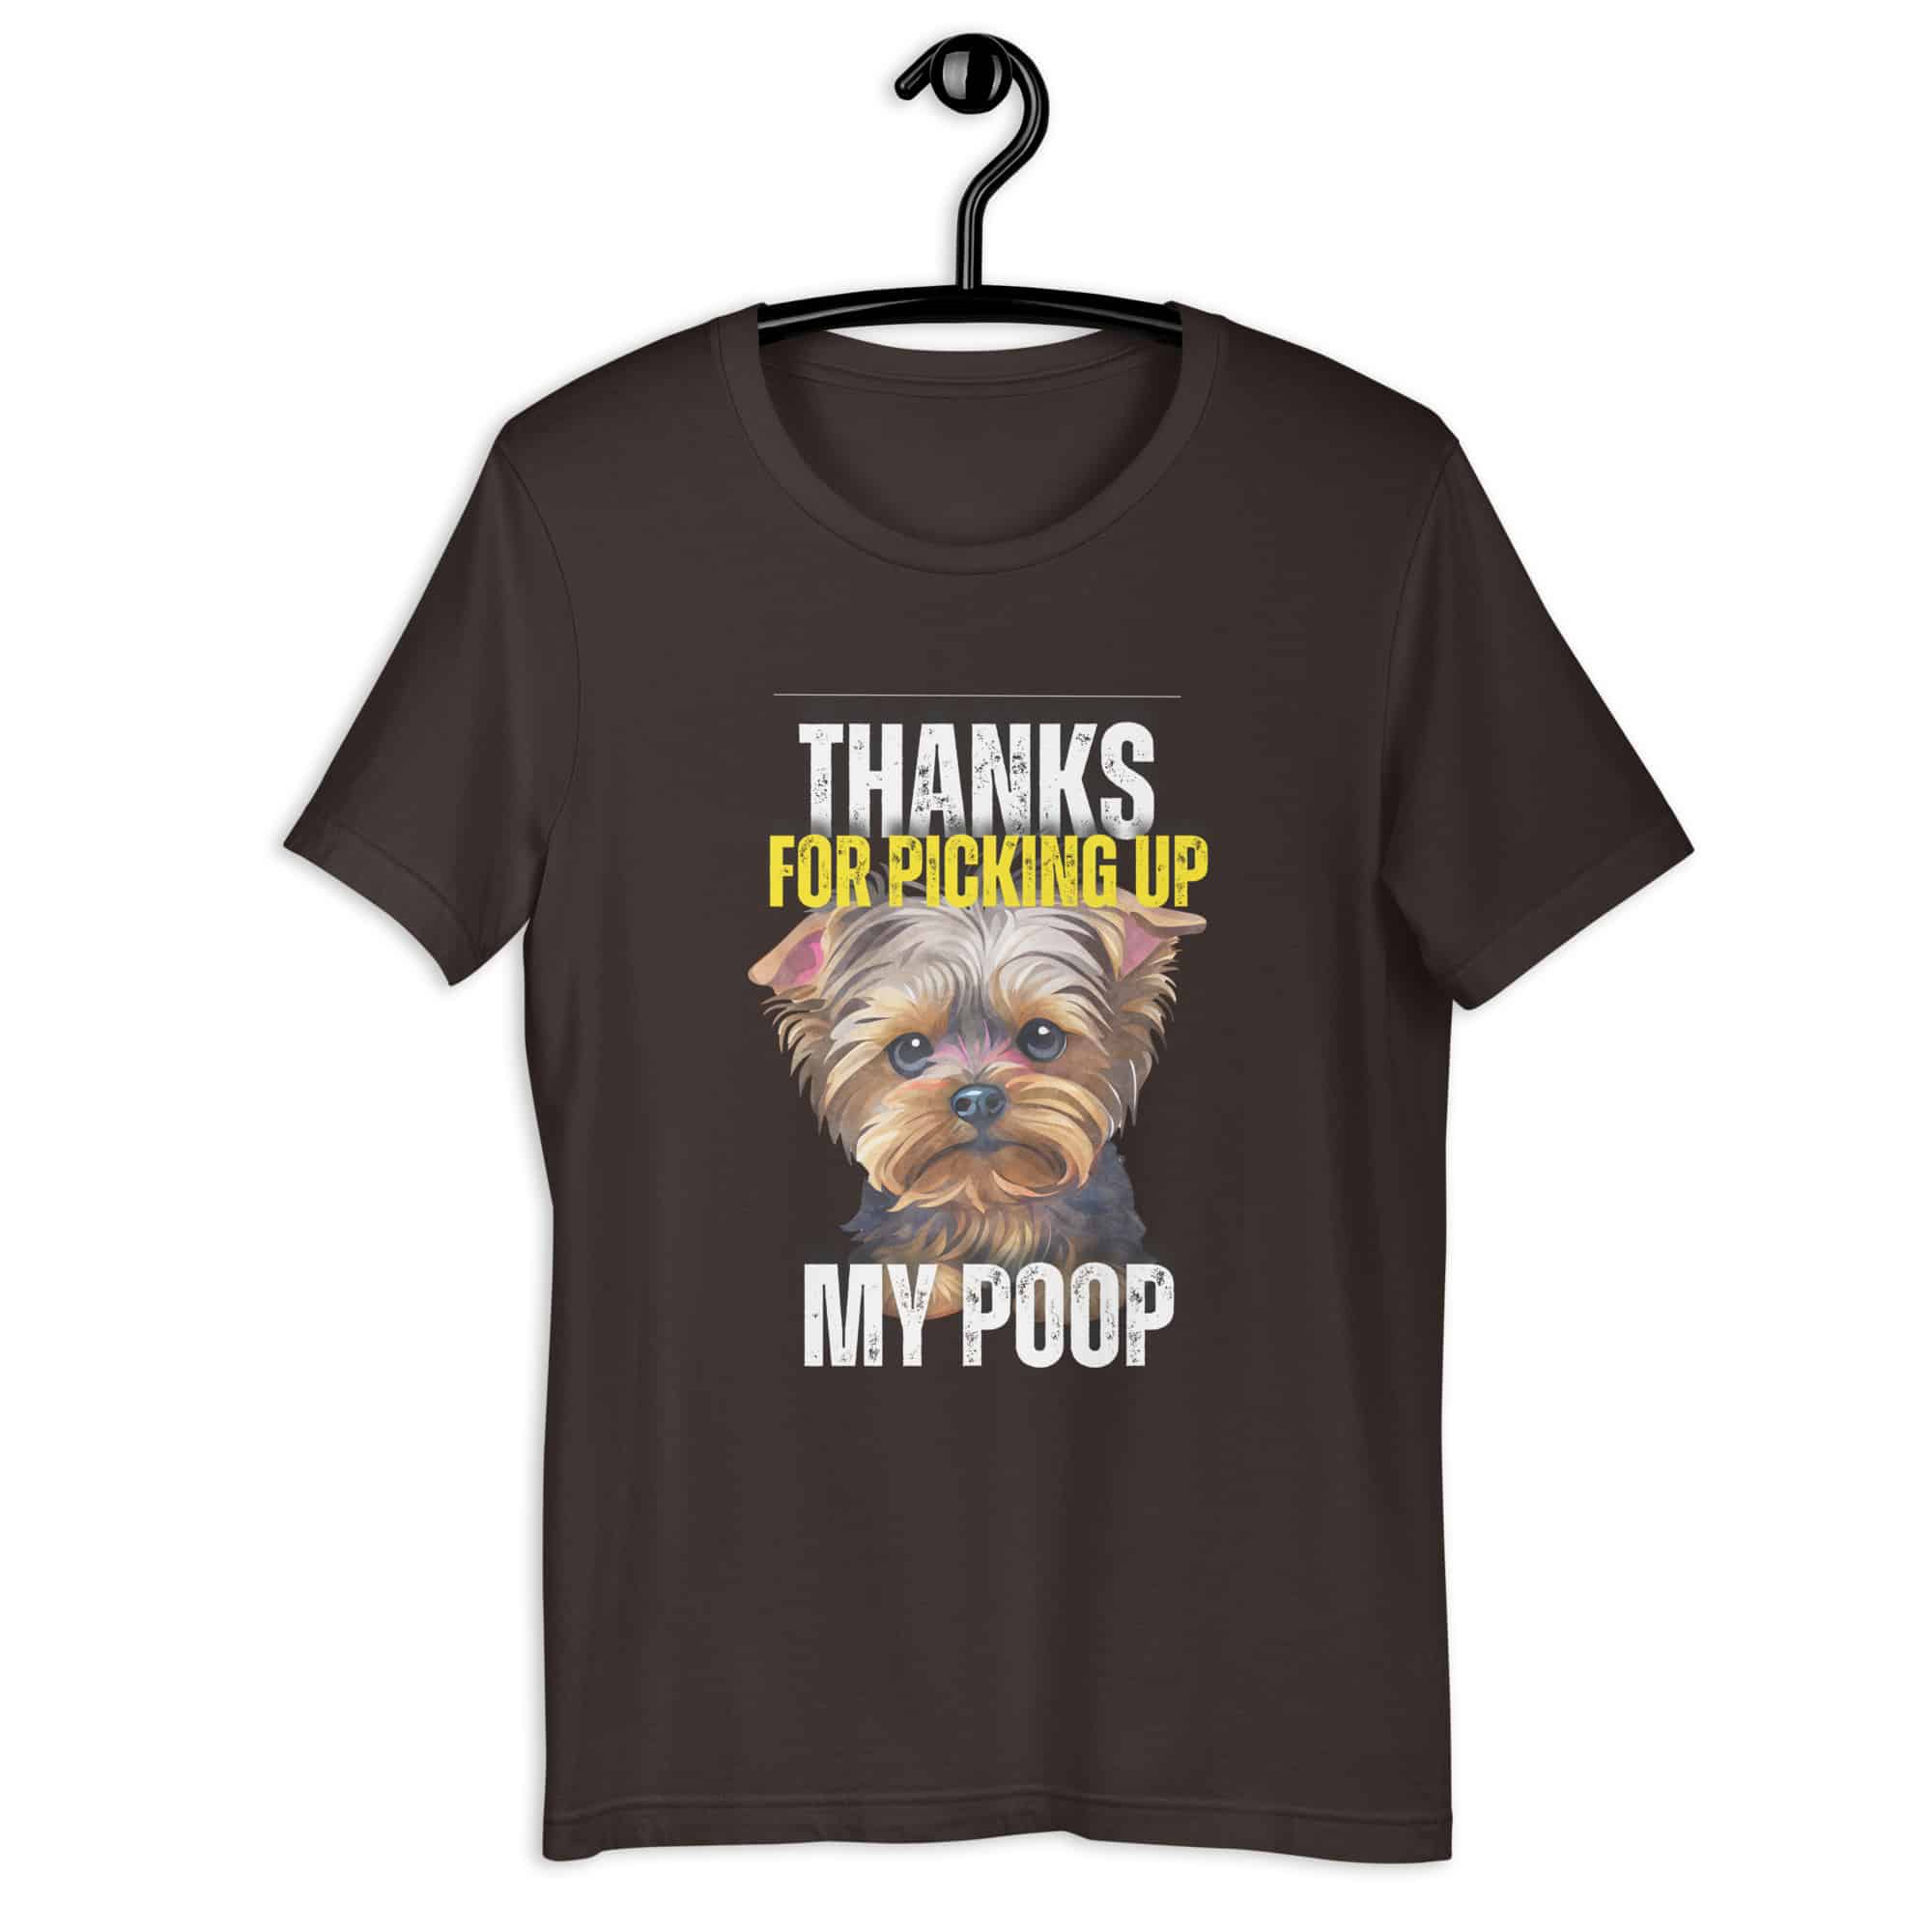 Thanks For Picking Up My POOP Funny Poodles Unisex T-Shirt. Brown